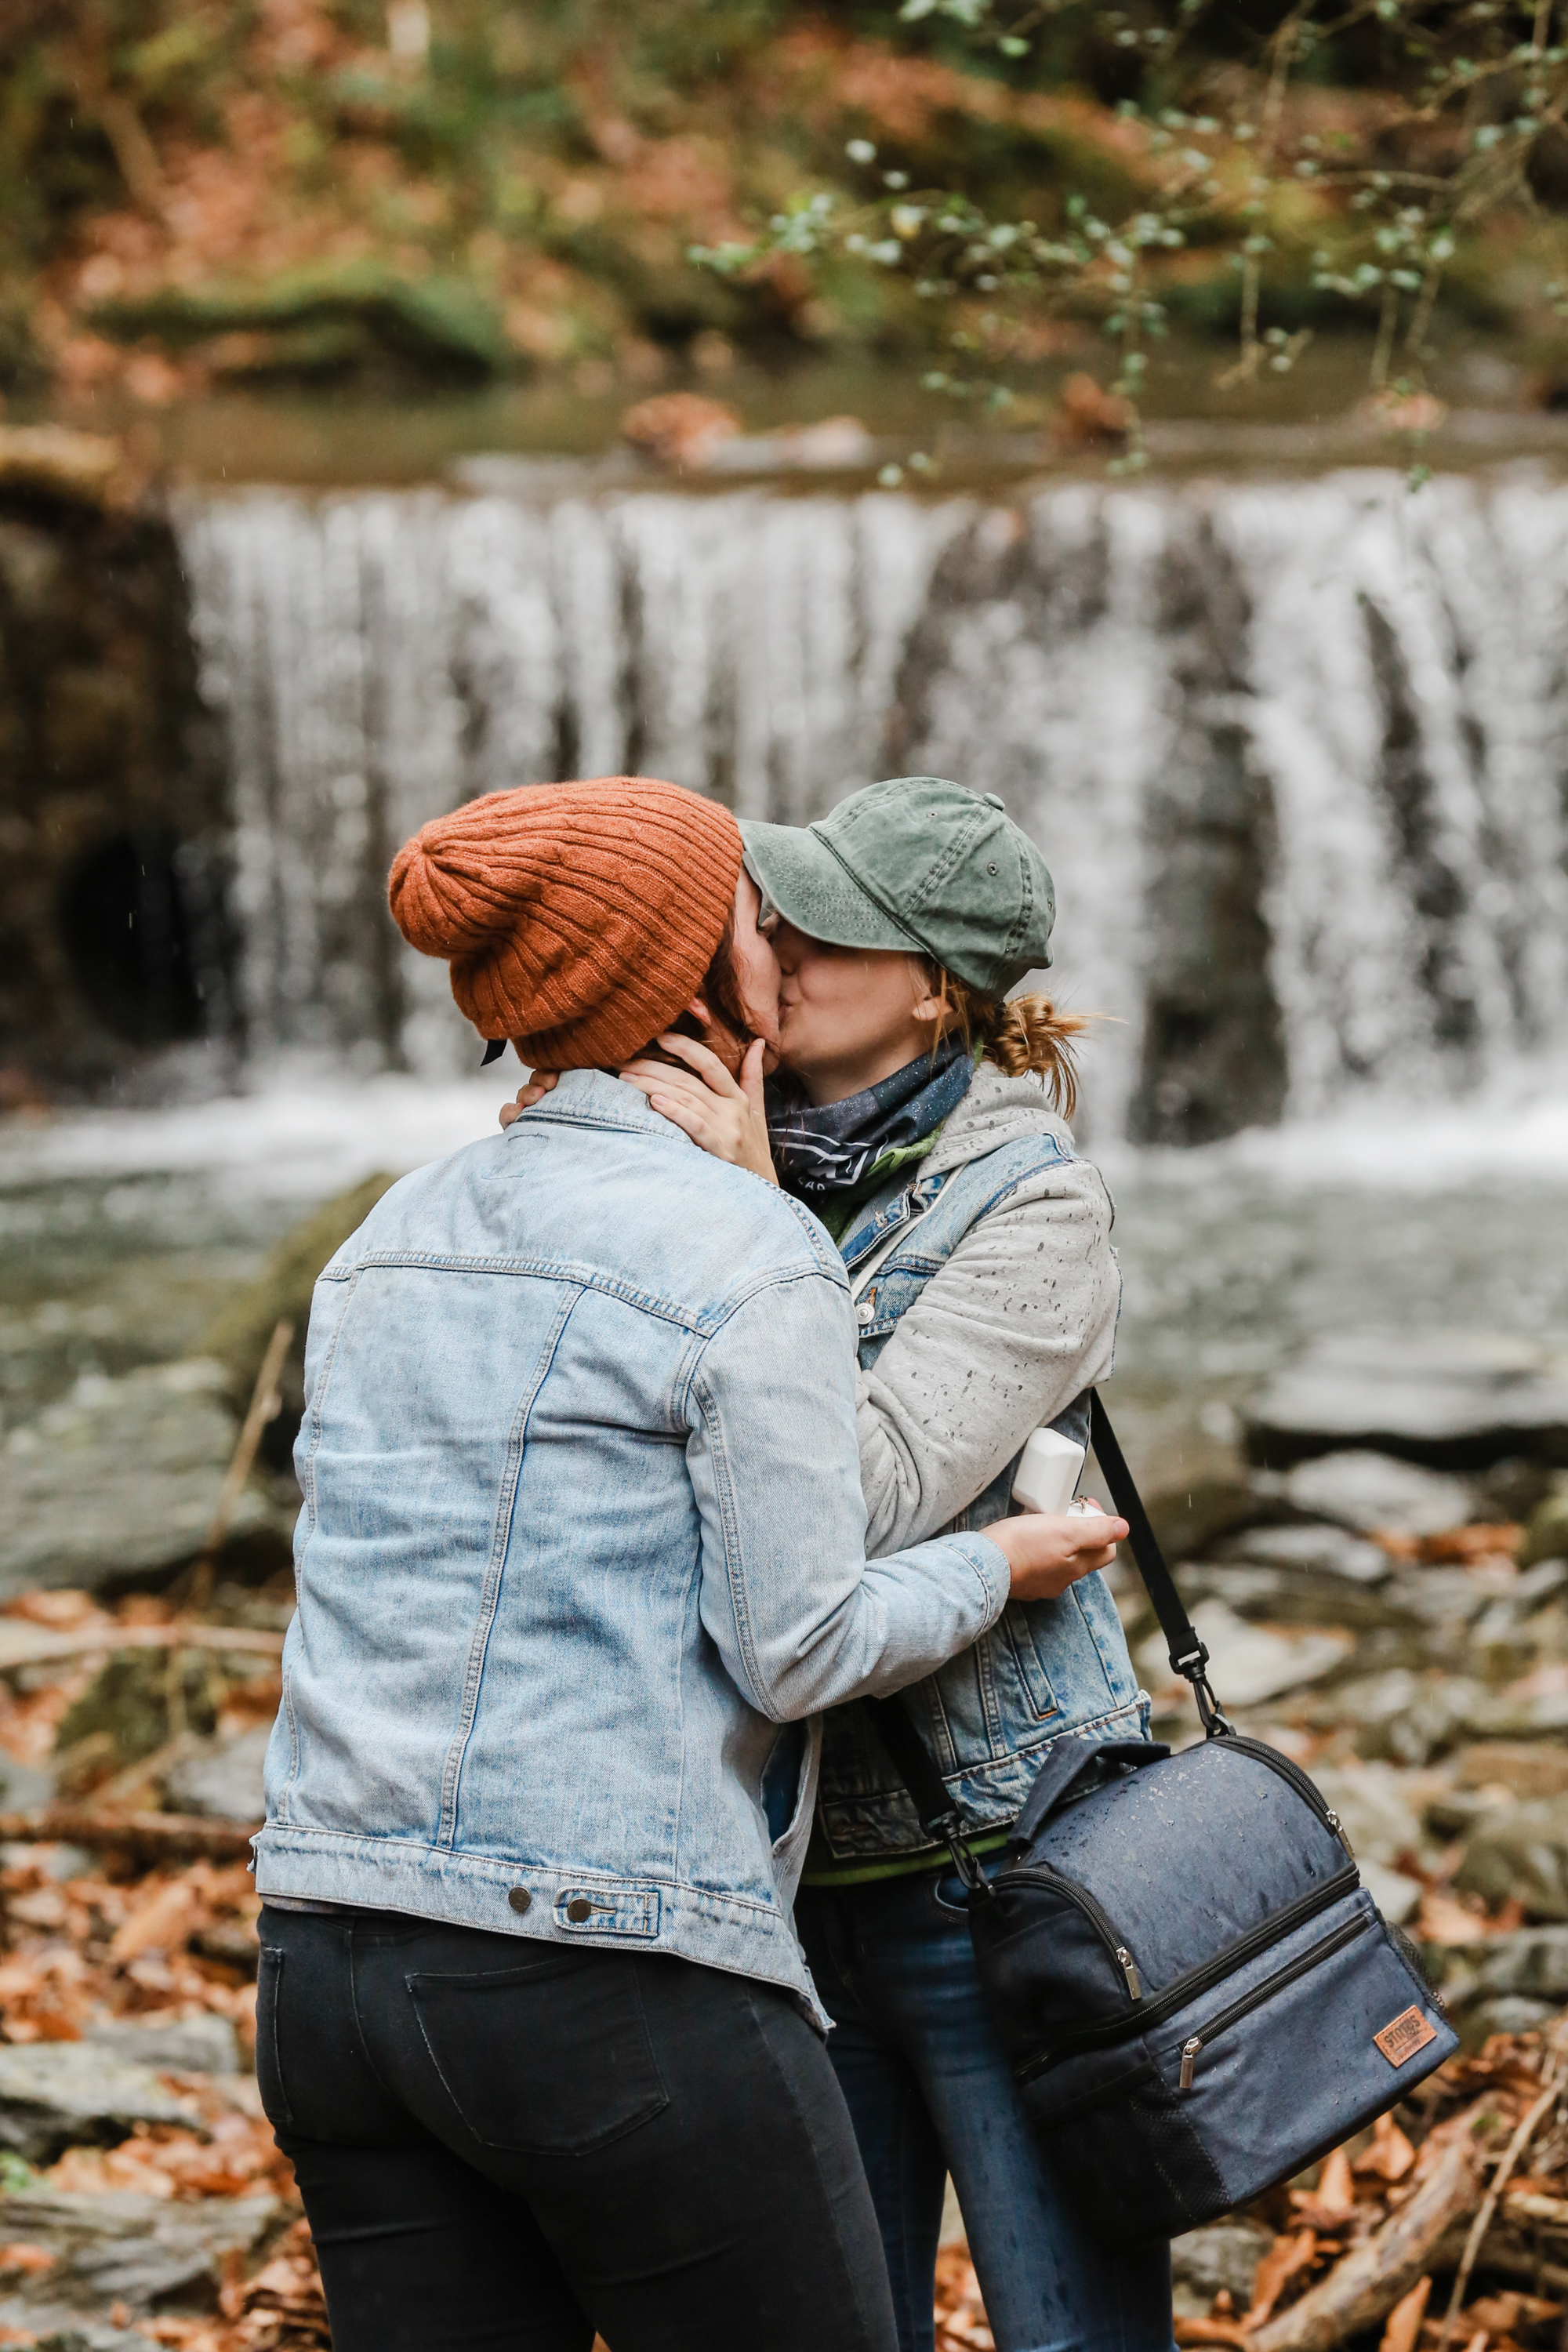 proposal ideas for adventure - on a hike